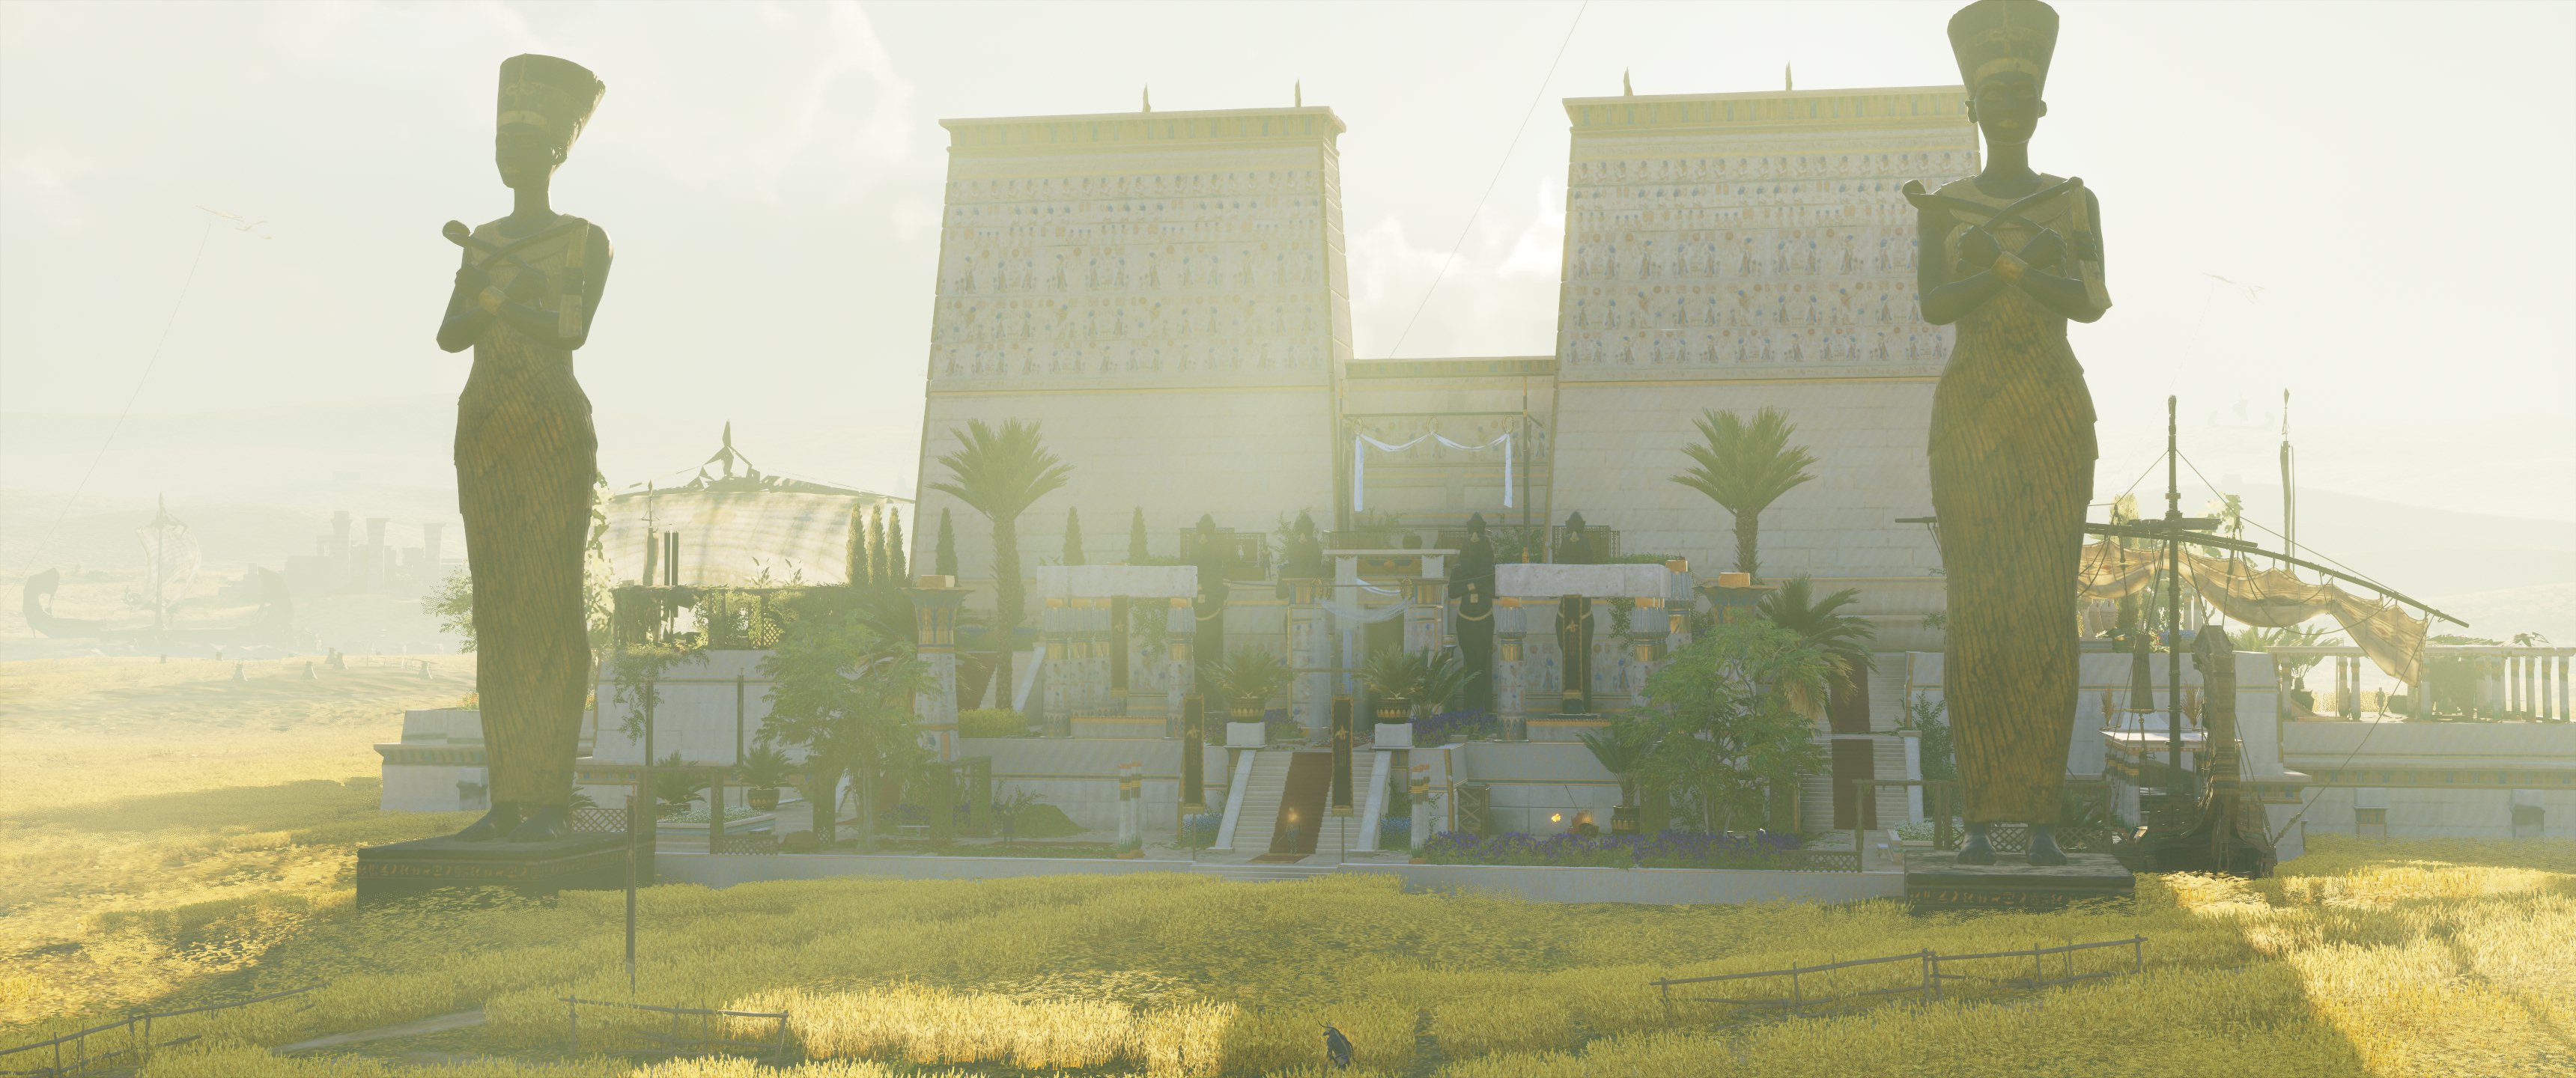 General 3440x1440 Assassin's Creed: Origins Assassin's Creed Bayek Ubisoft digital art overexposed video games video game art screen shot statue stairs sky sunlight trees CGI flowers shadow boat landscape